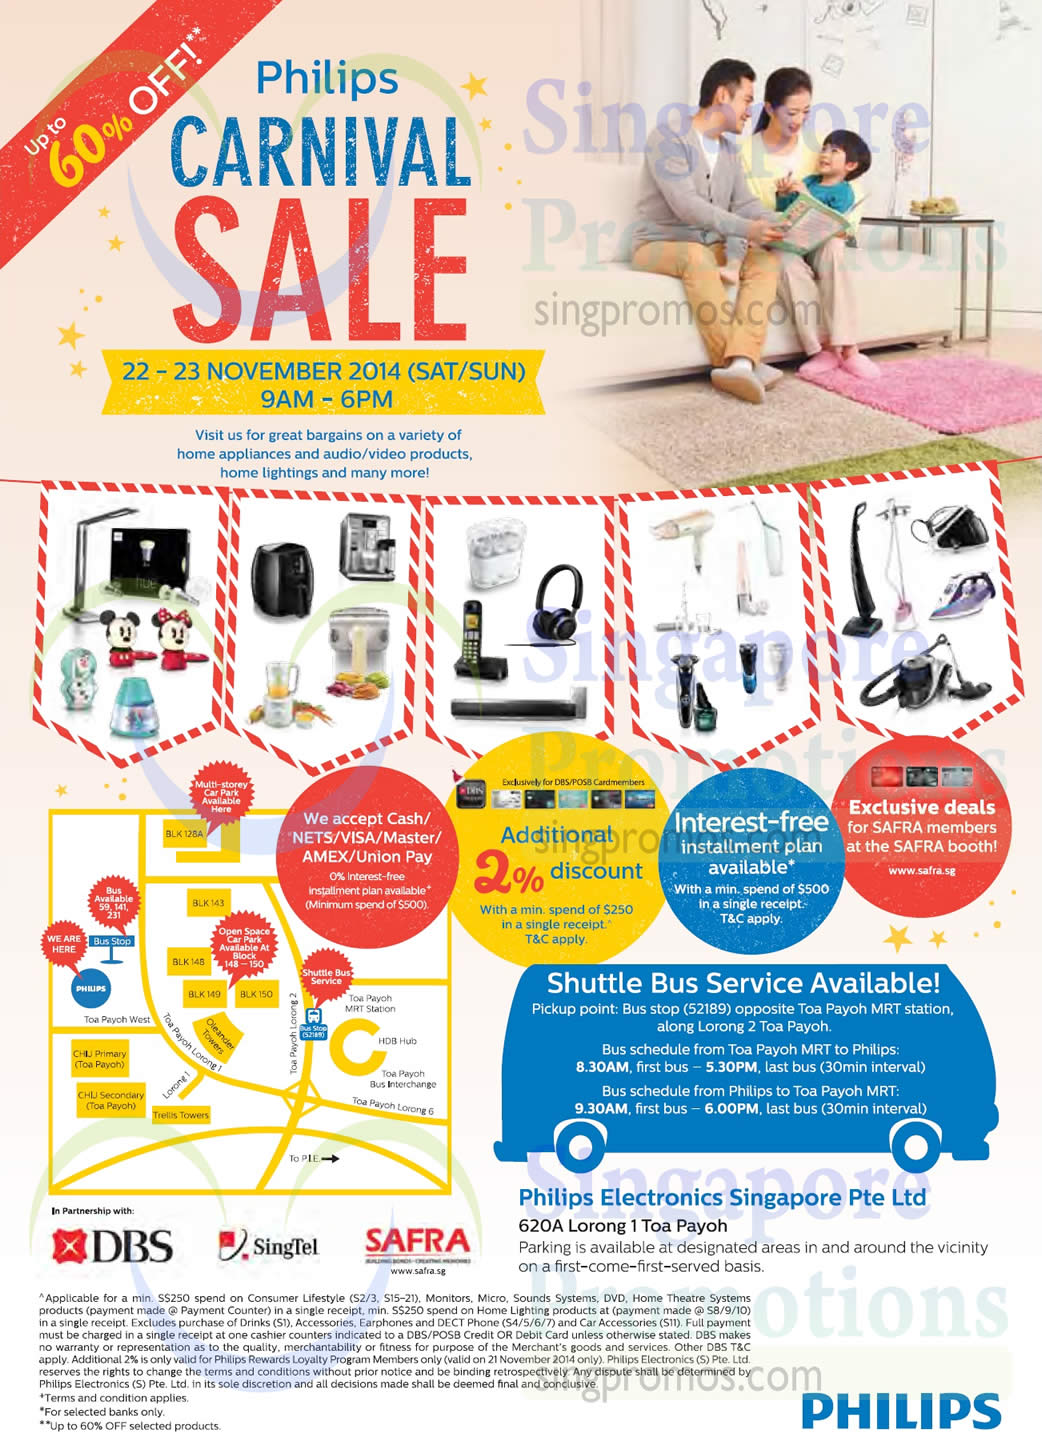 Featured image for Philips Carnival SALE (Nov 2014) @ Toa Payoh 22 - 23 Nov 2014